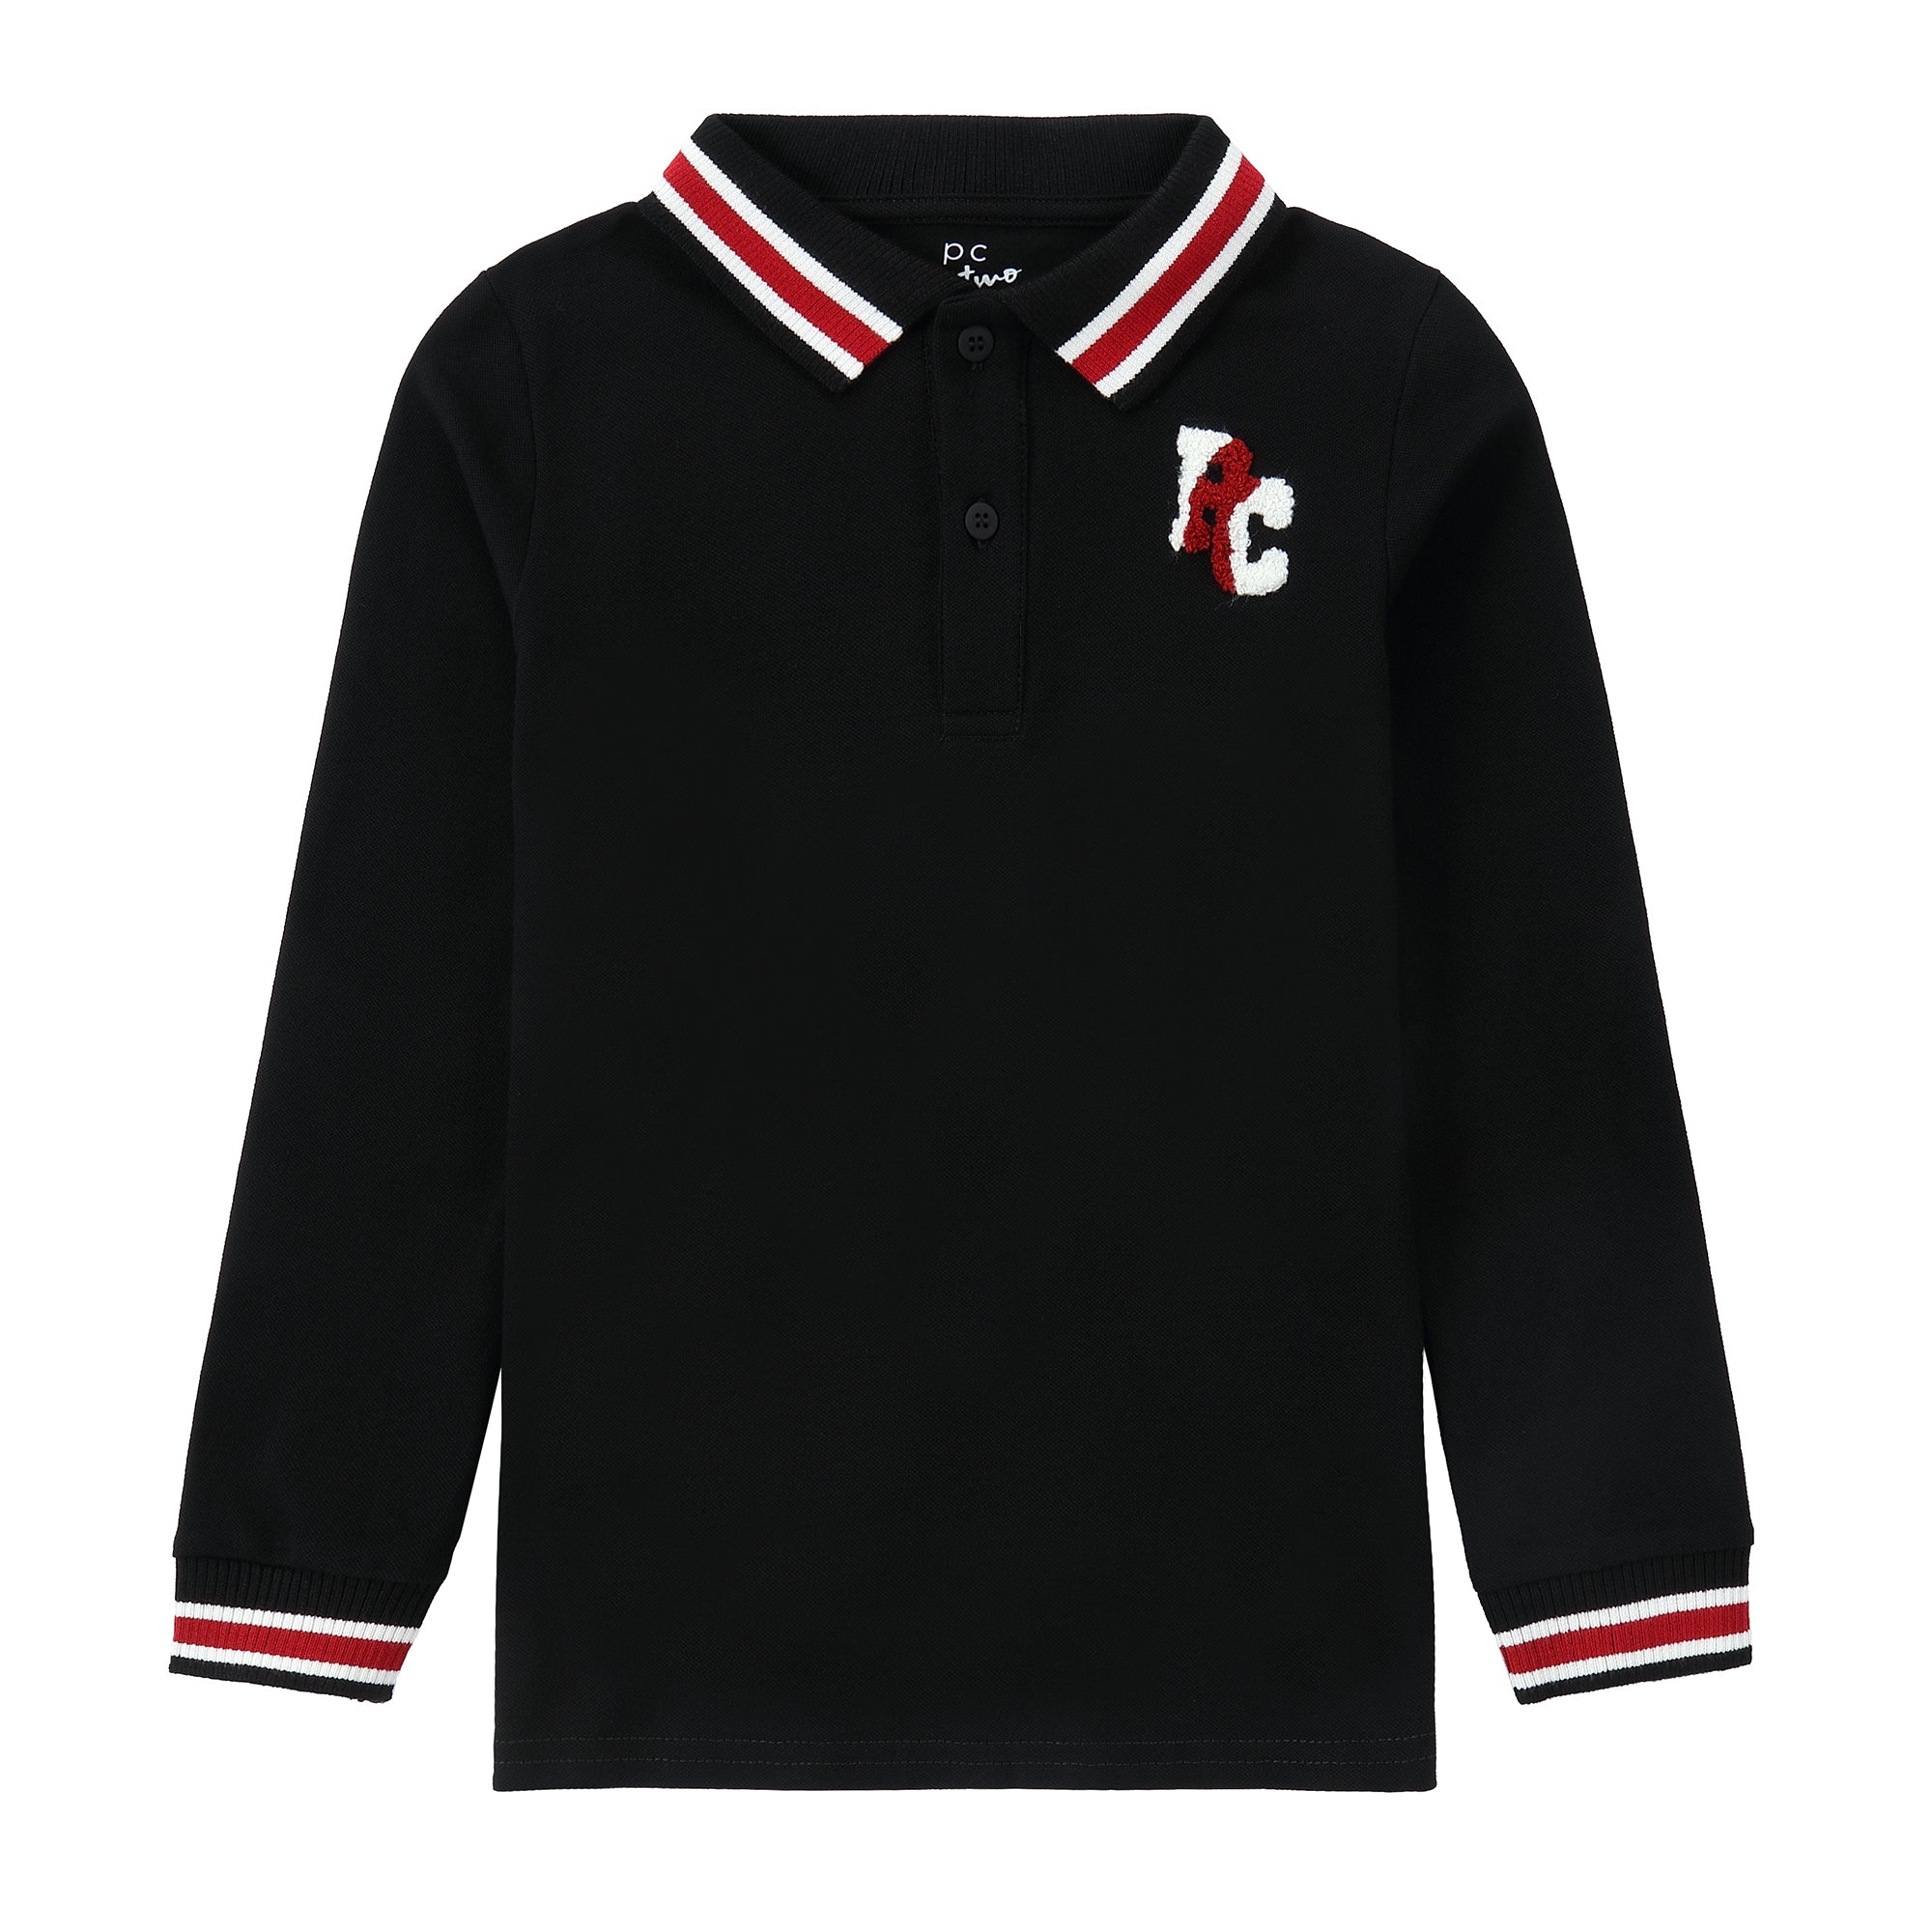 Black Polo With "PC Patch"